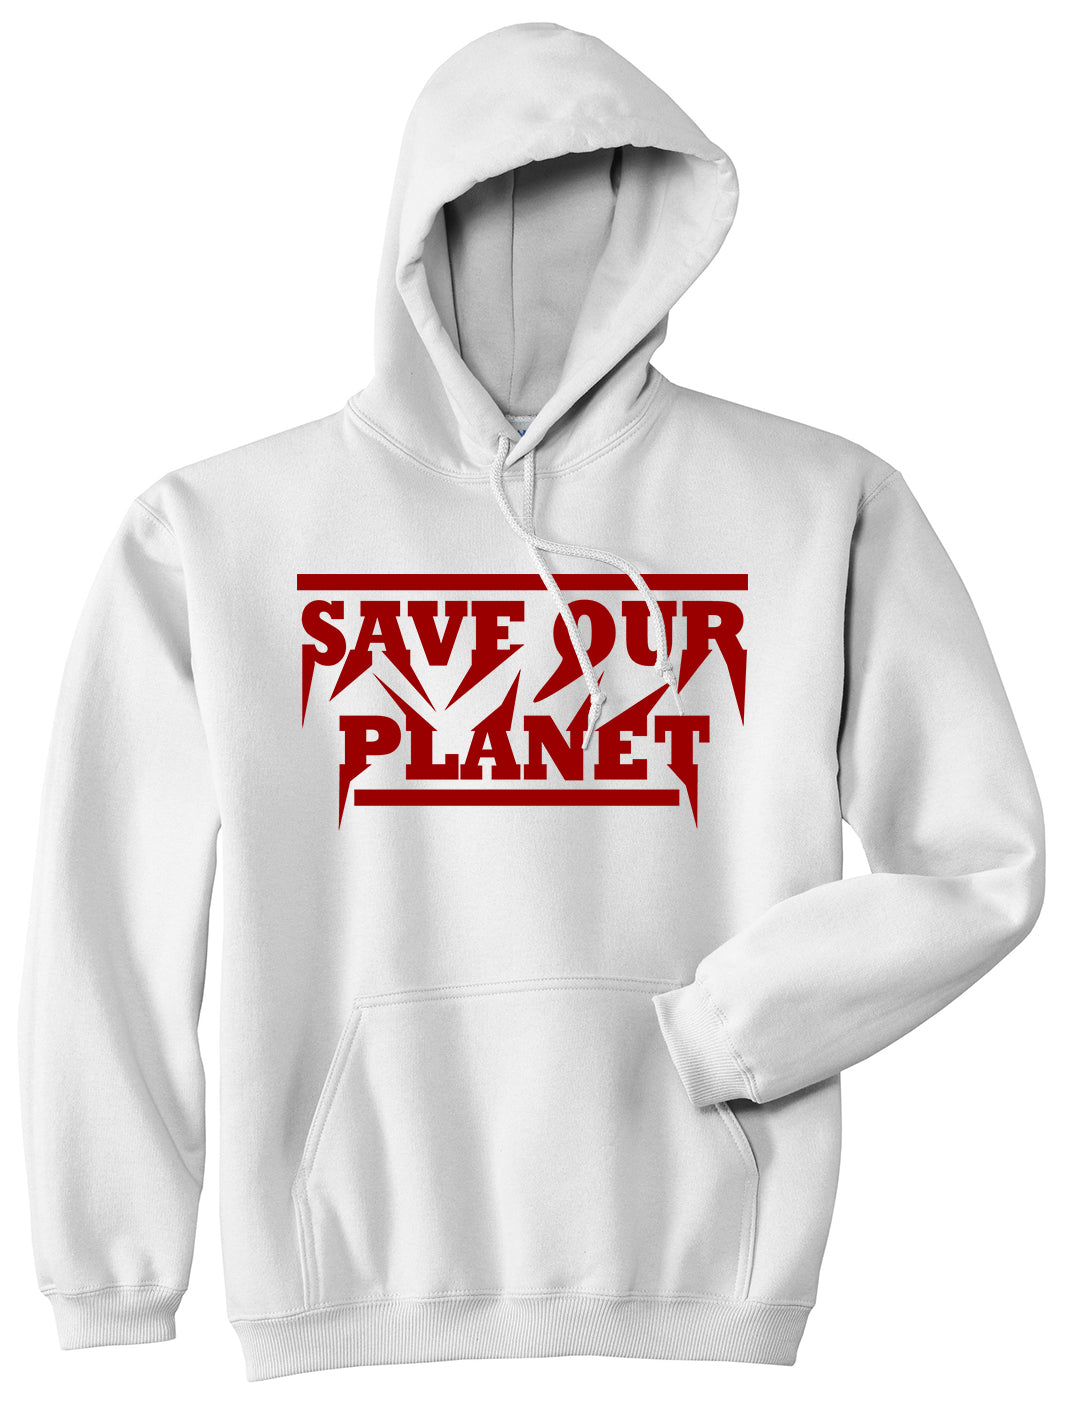 Save Our Planet Mens Pullover Hoodie White